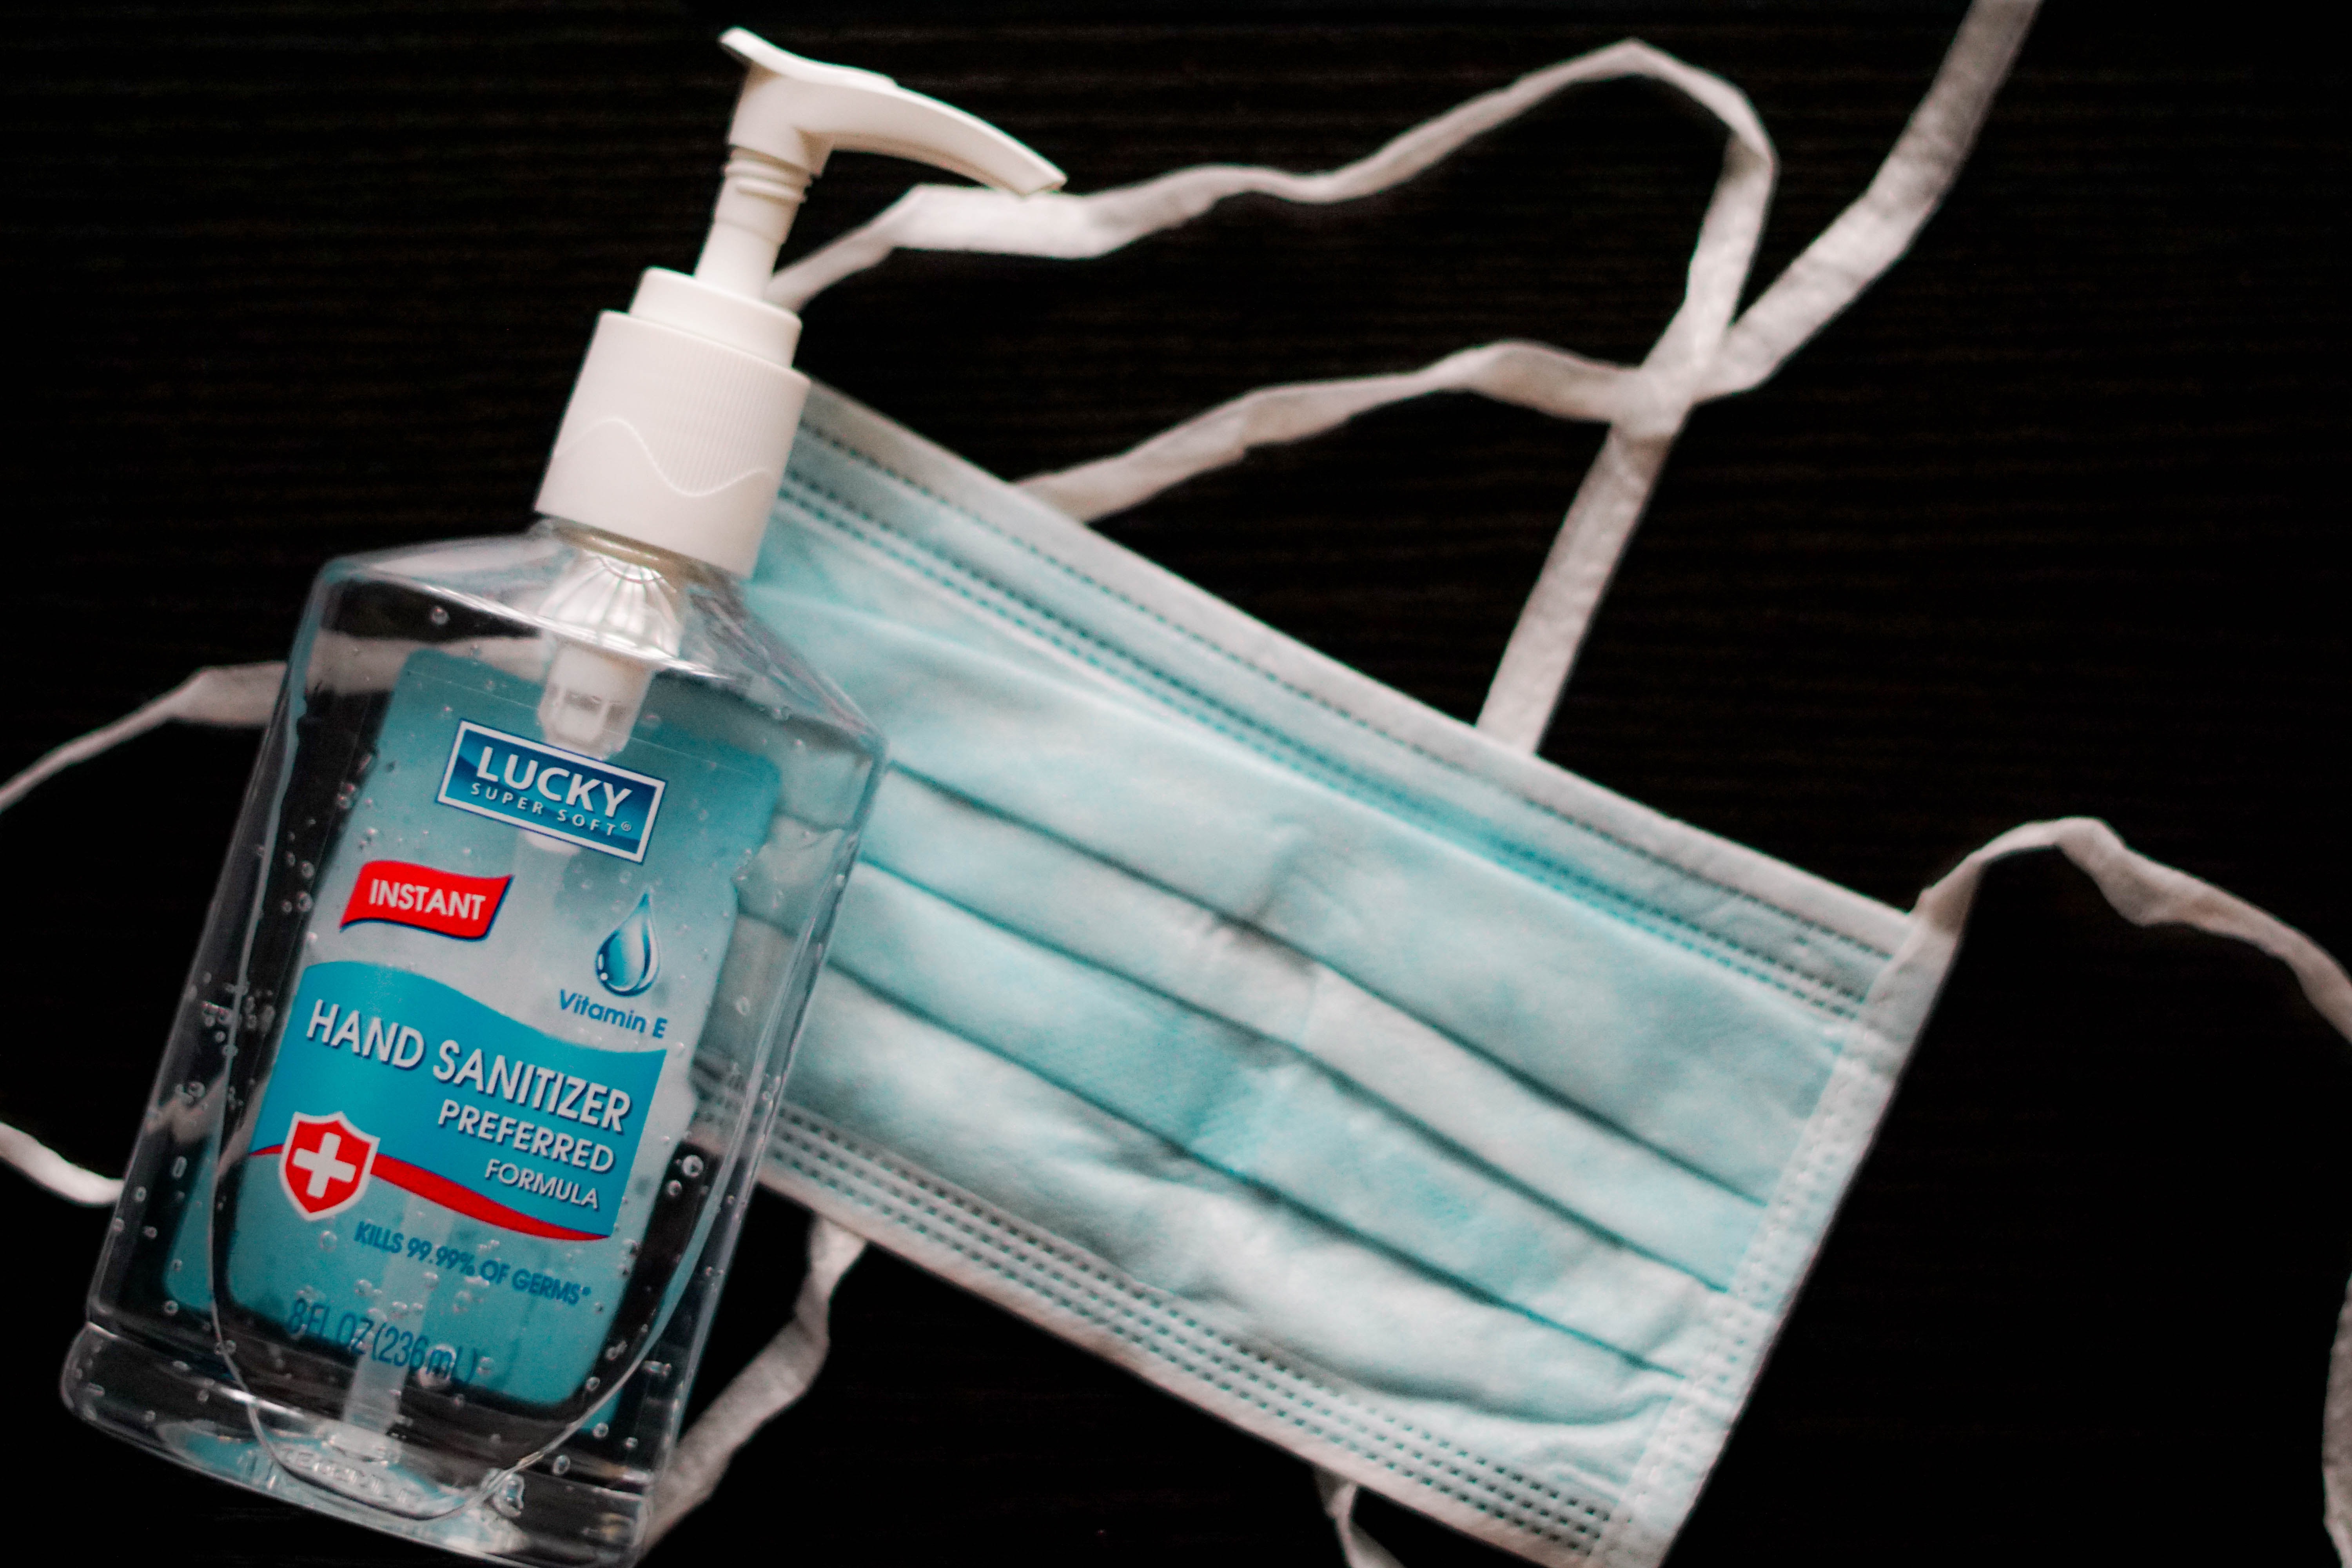 A closeup view of a protective mask and a bottle of hand sanitizer.